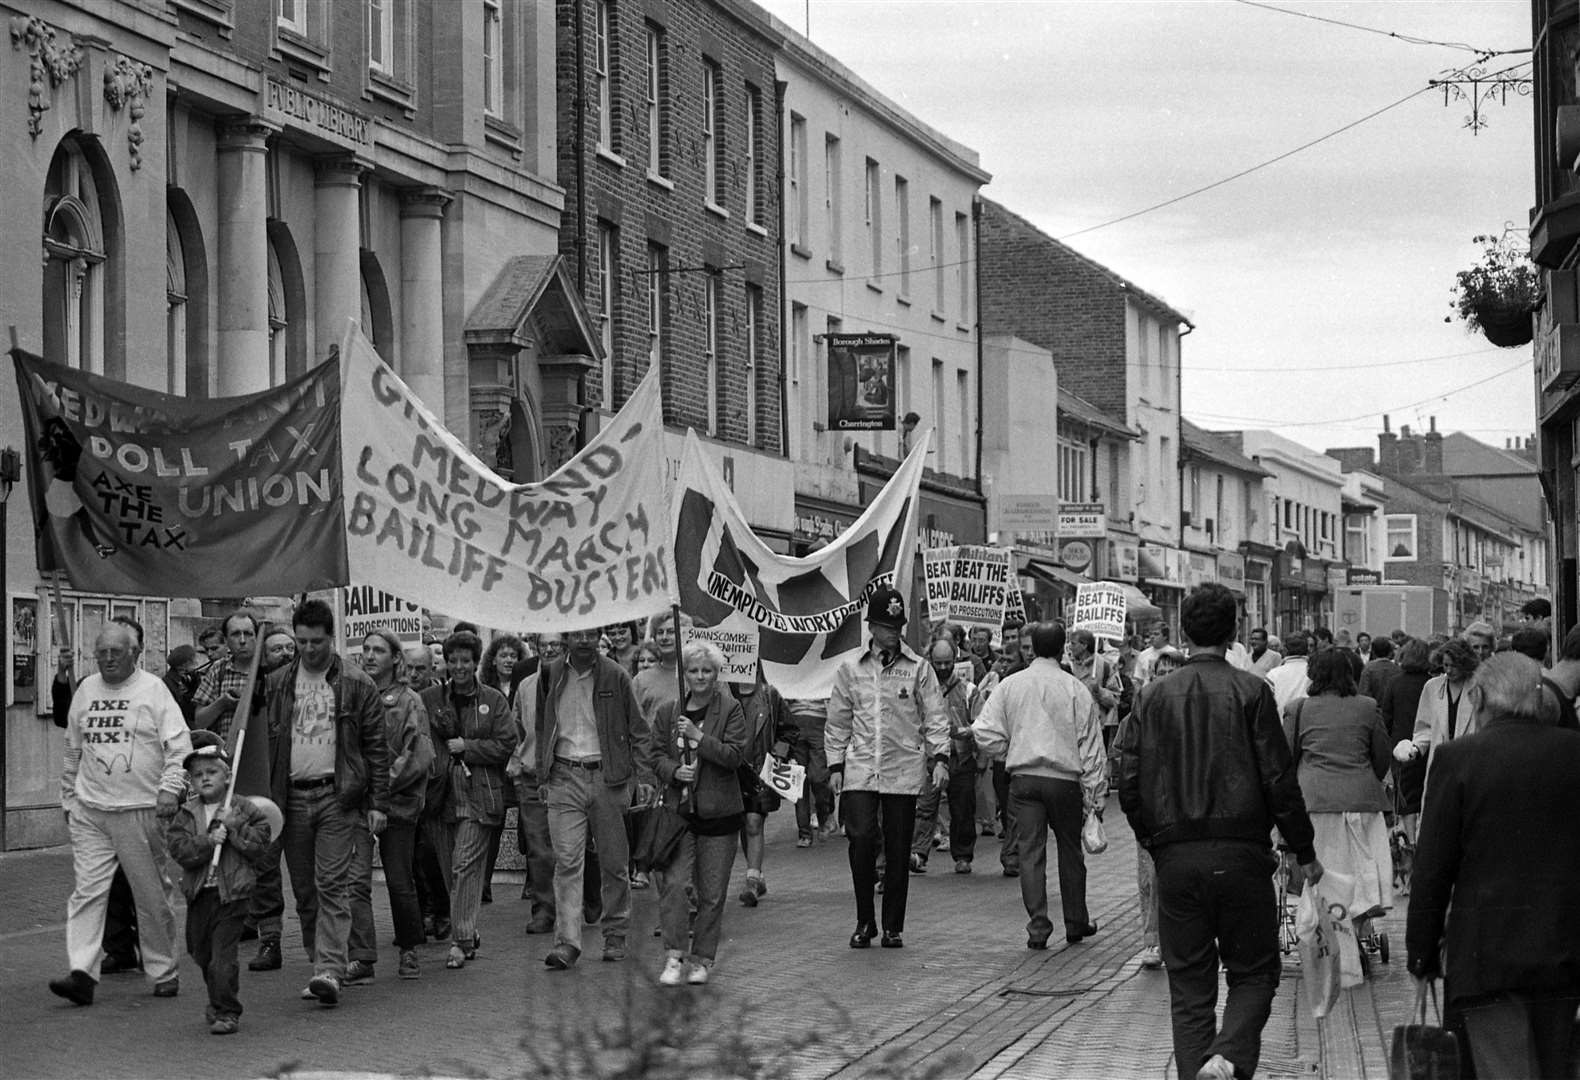 A march against the Poll Tax on the streets of Gravesend in 1990.